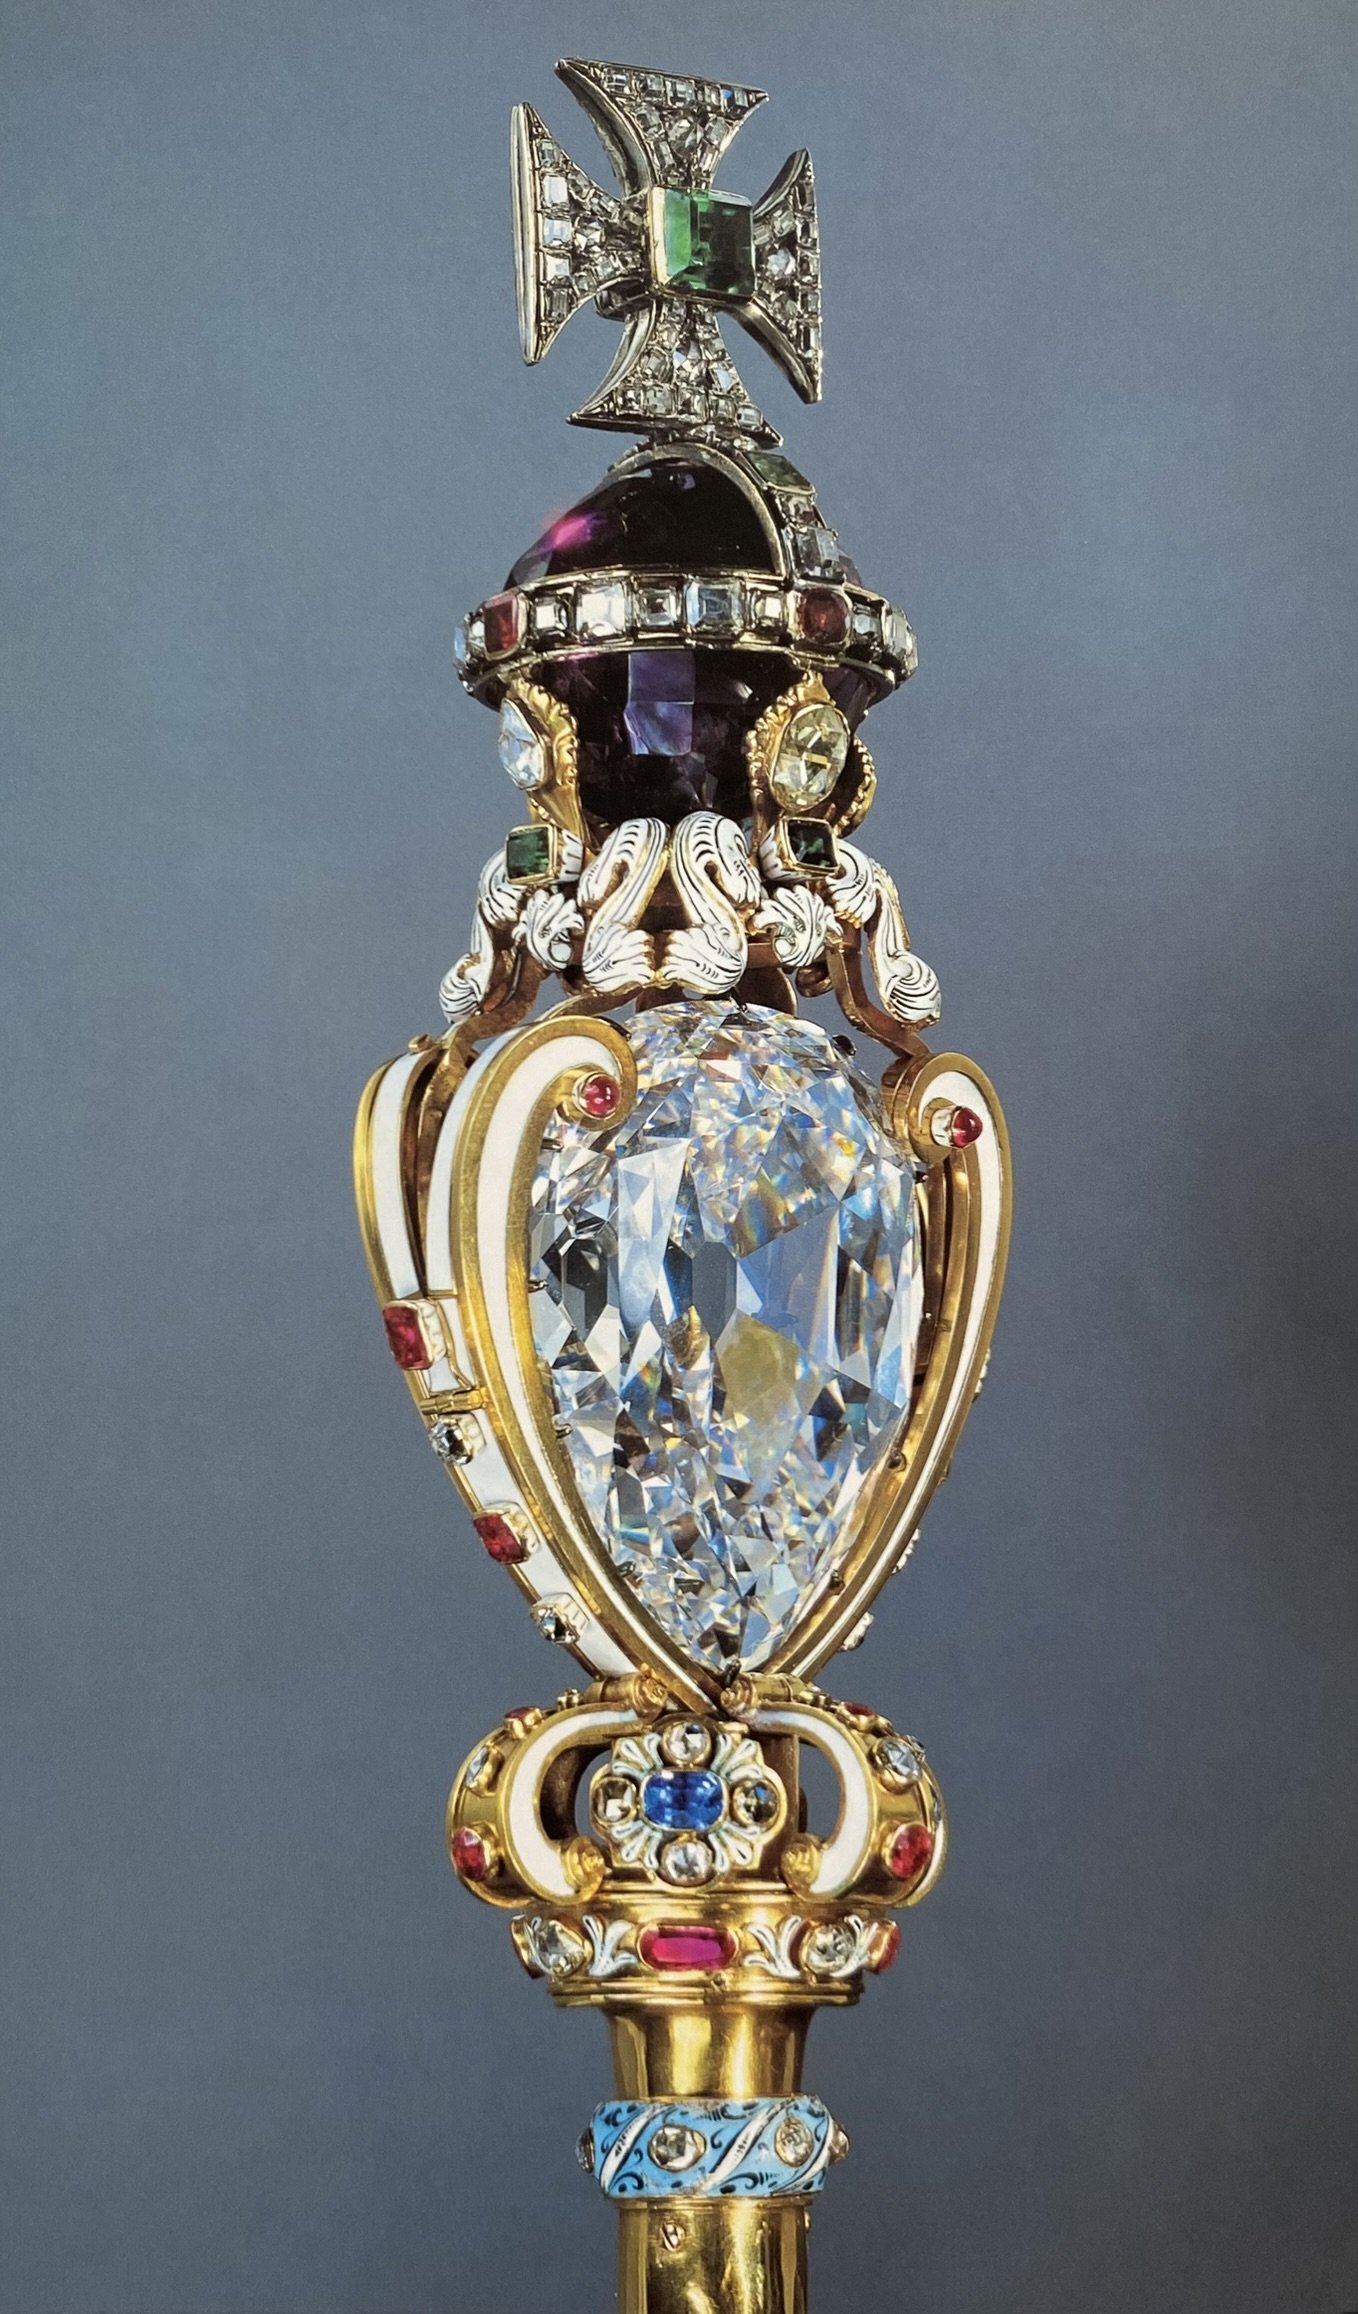 Cullinan I at the top of Sovereign’s Sceptre British Crown Jewels